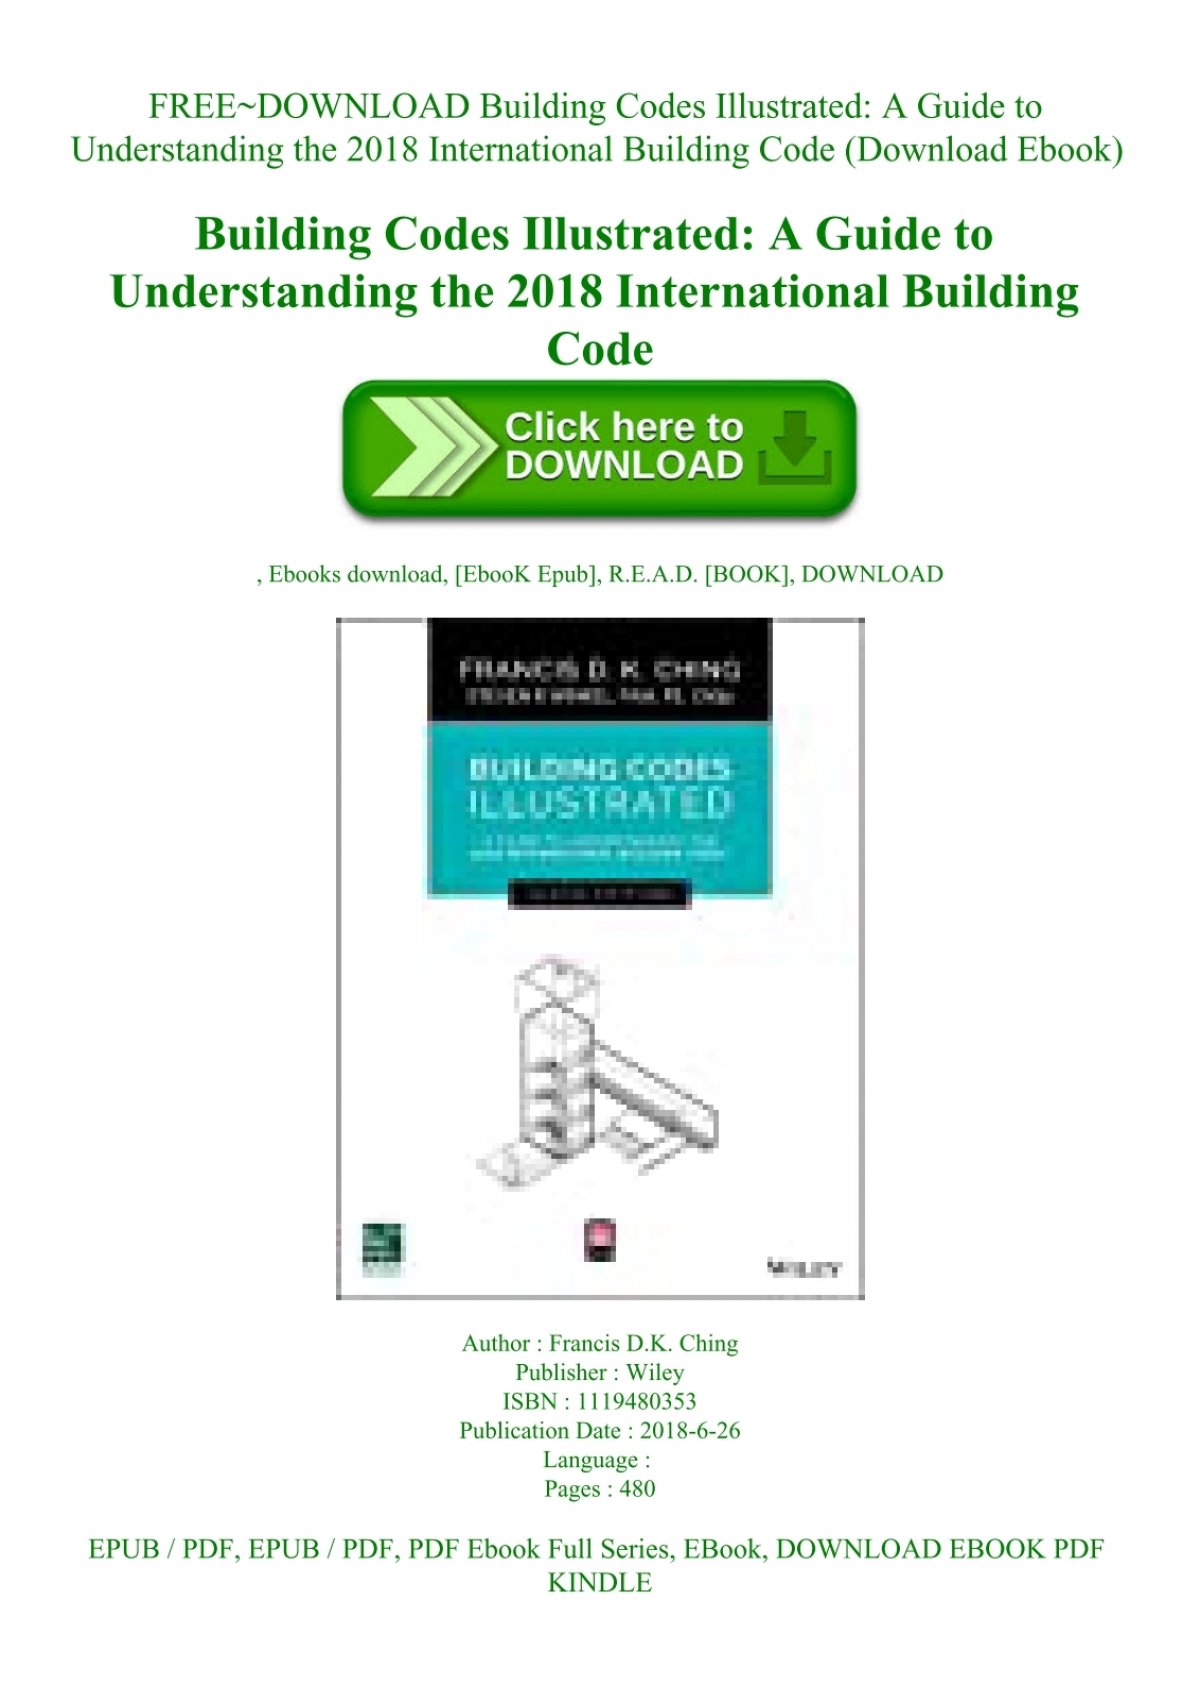 building codes illustrated 2018 free download